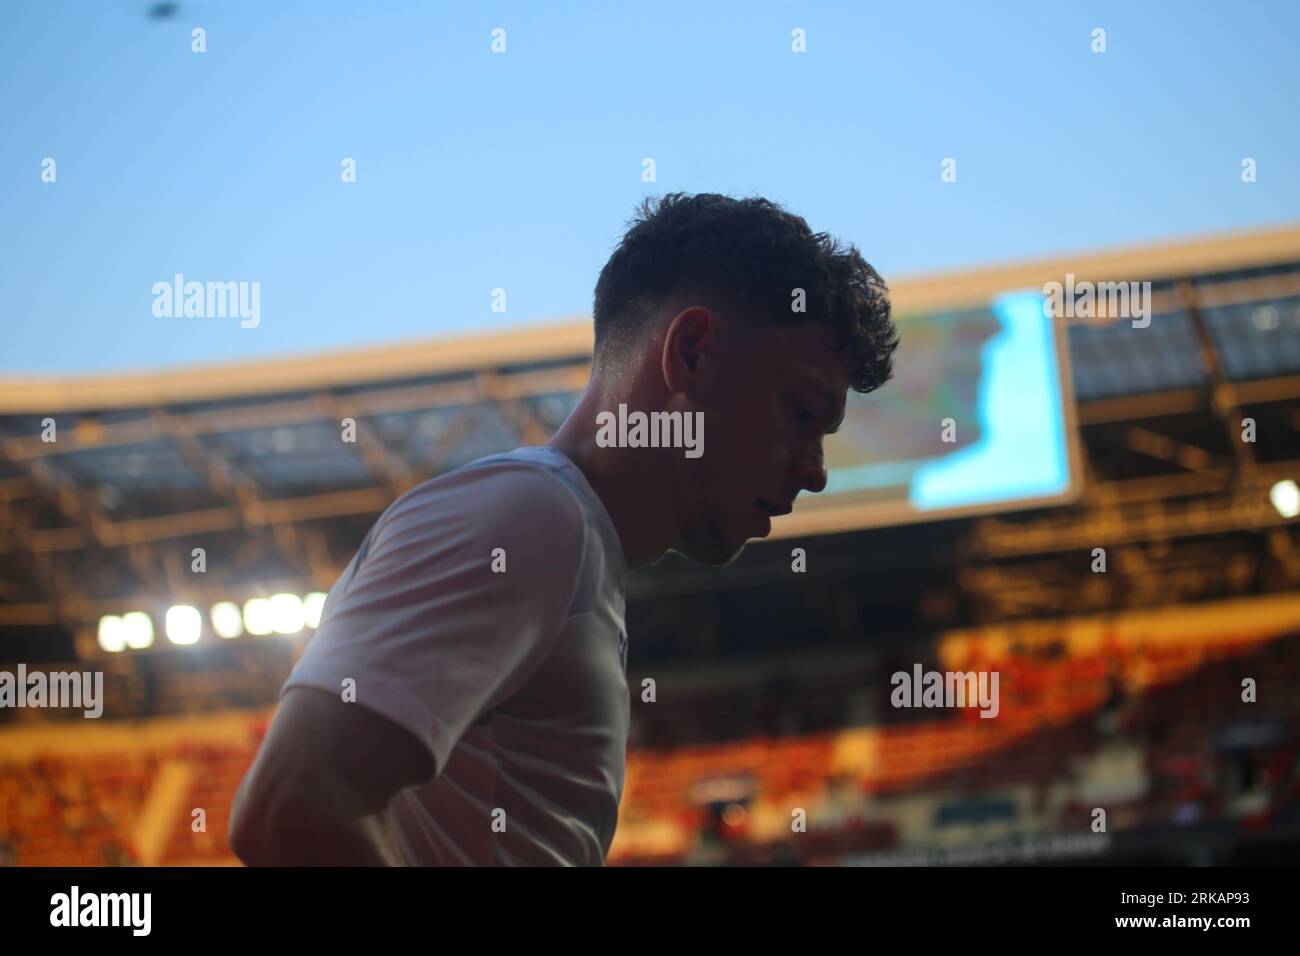 Pamplona, Spain, 24th August, 2023: Club Brugge player Andreas Skov Olsen warming up during the first leg match of the UEFA Europa Conference League 2023-24 Preliminary Round between CA Osasuna and Club Brugge at the Estadio from El Sadar, in Pamplona, on August 24, 2023. Credit: Alberto Brevers / Alamy Live News. Stock Photo